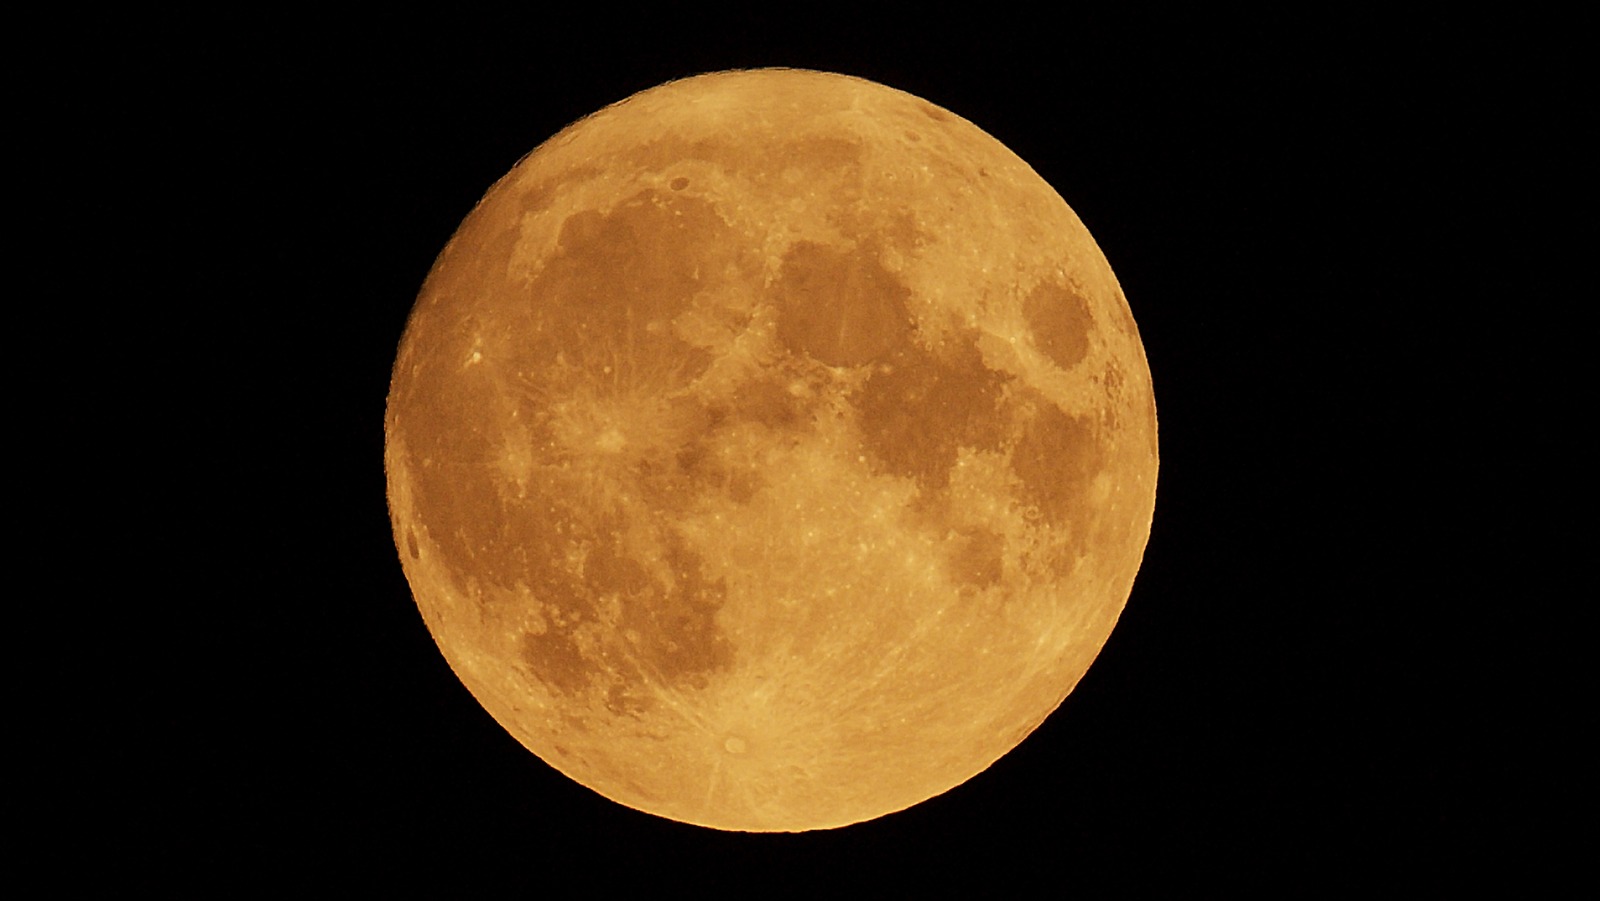 How Likely Is It To See A Full Moon On Halloween?